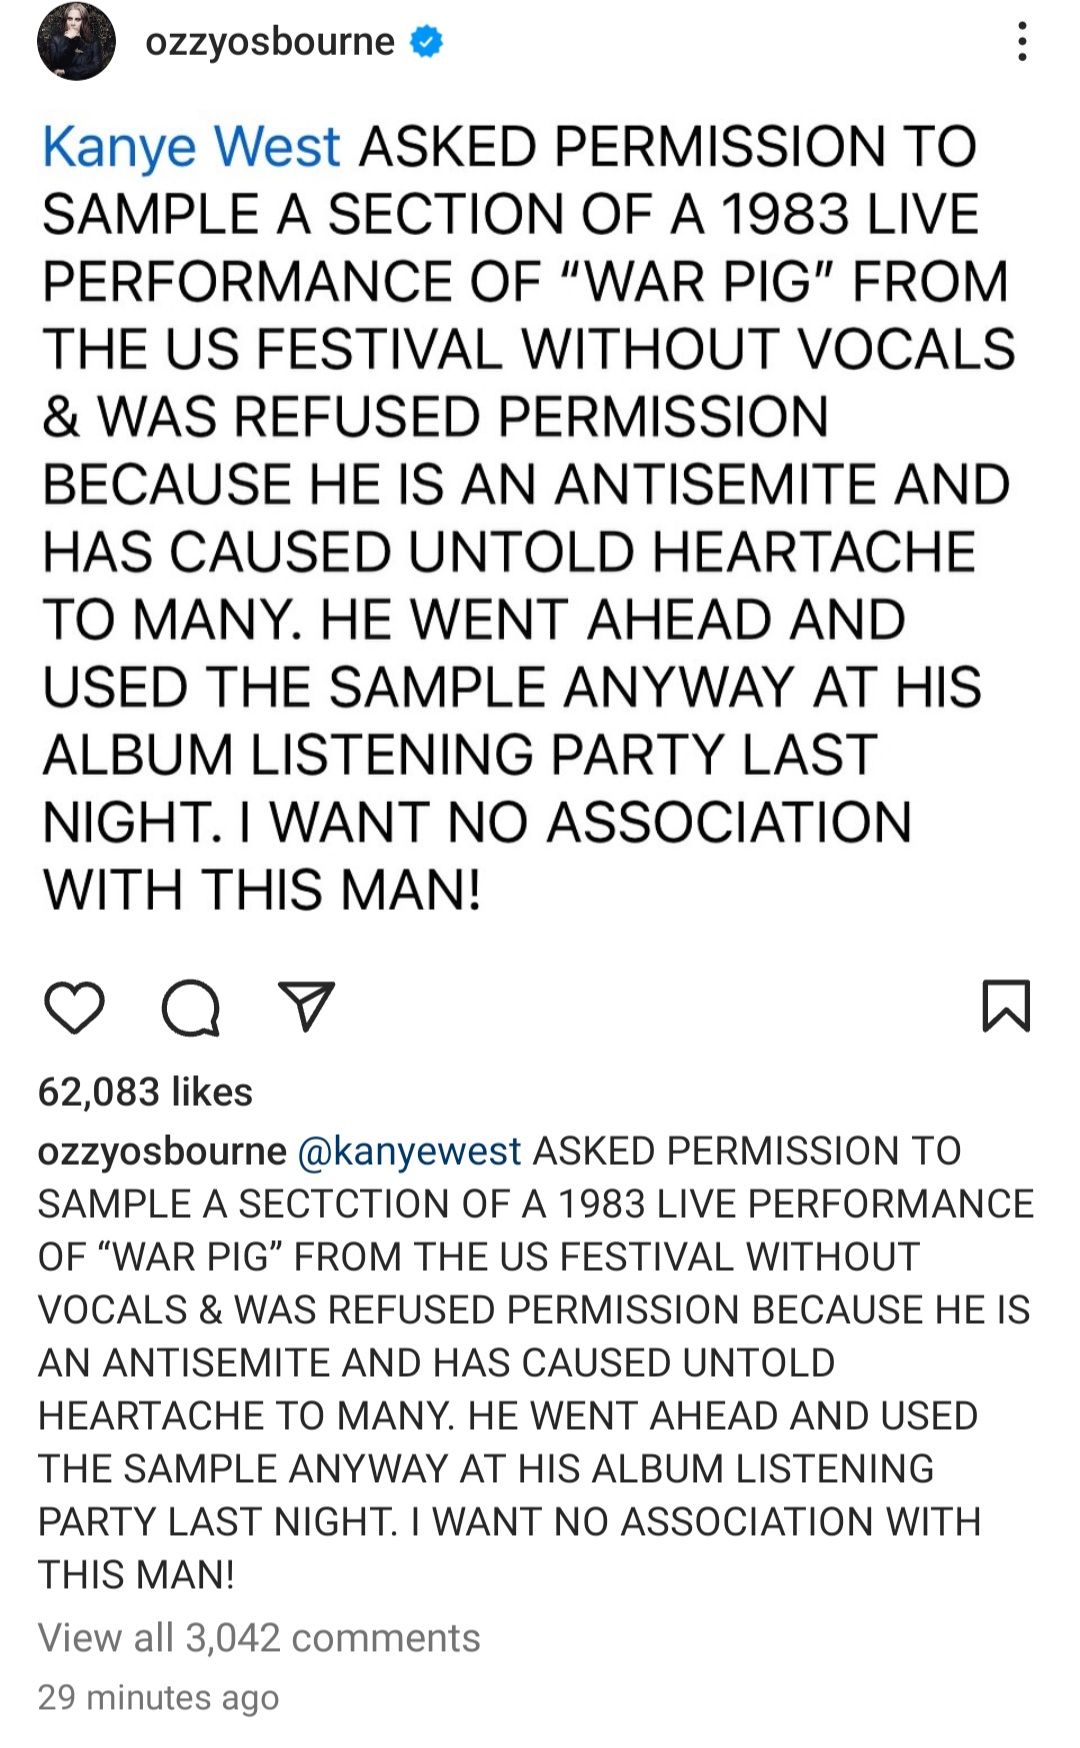 "I want no association with this man" Ozzy Osbourne slams Kanye West for sampling his song even after he denied him permission for being "Antisemite"